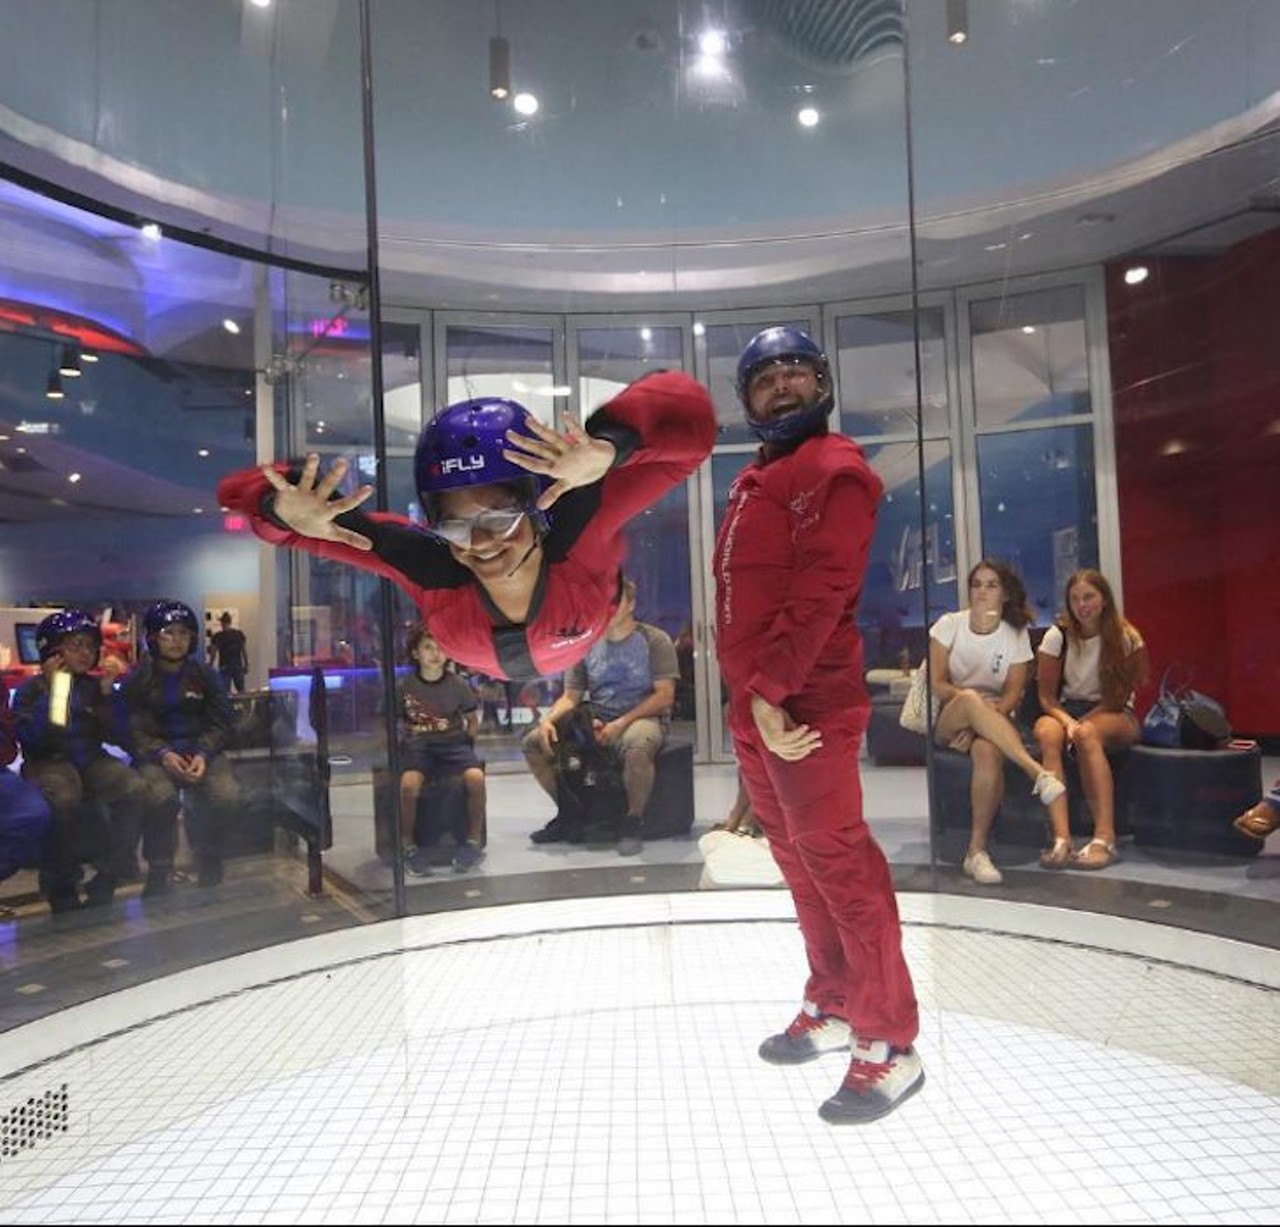 Give in to your inner adrenaline junkie at iFly Skydiving 
8969 International Drive, 407-337-4359, www.iflyworld.com 
Feel what it's like to skydive without actually having to jump from that airborne plane, and grab some great pictures while you're at it. 
Photo via lorenasdisneyadventures/Instagram